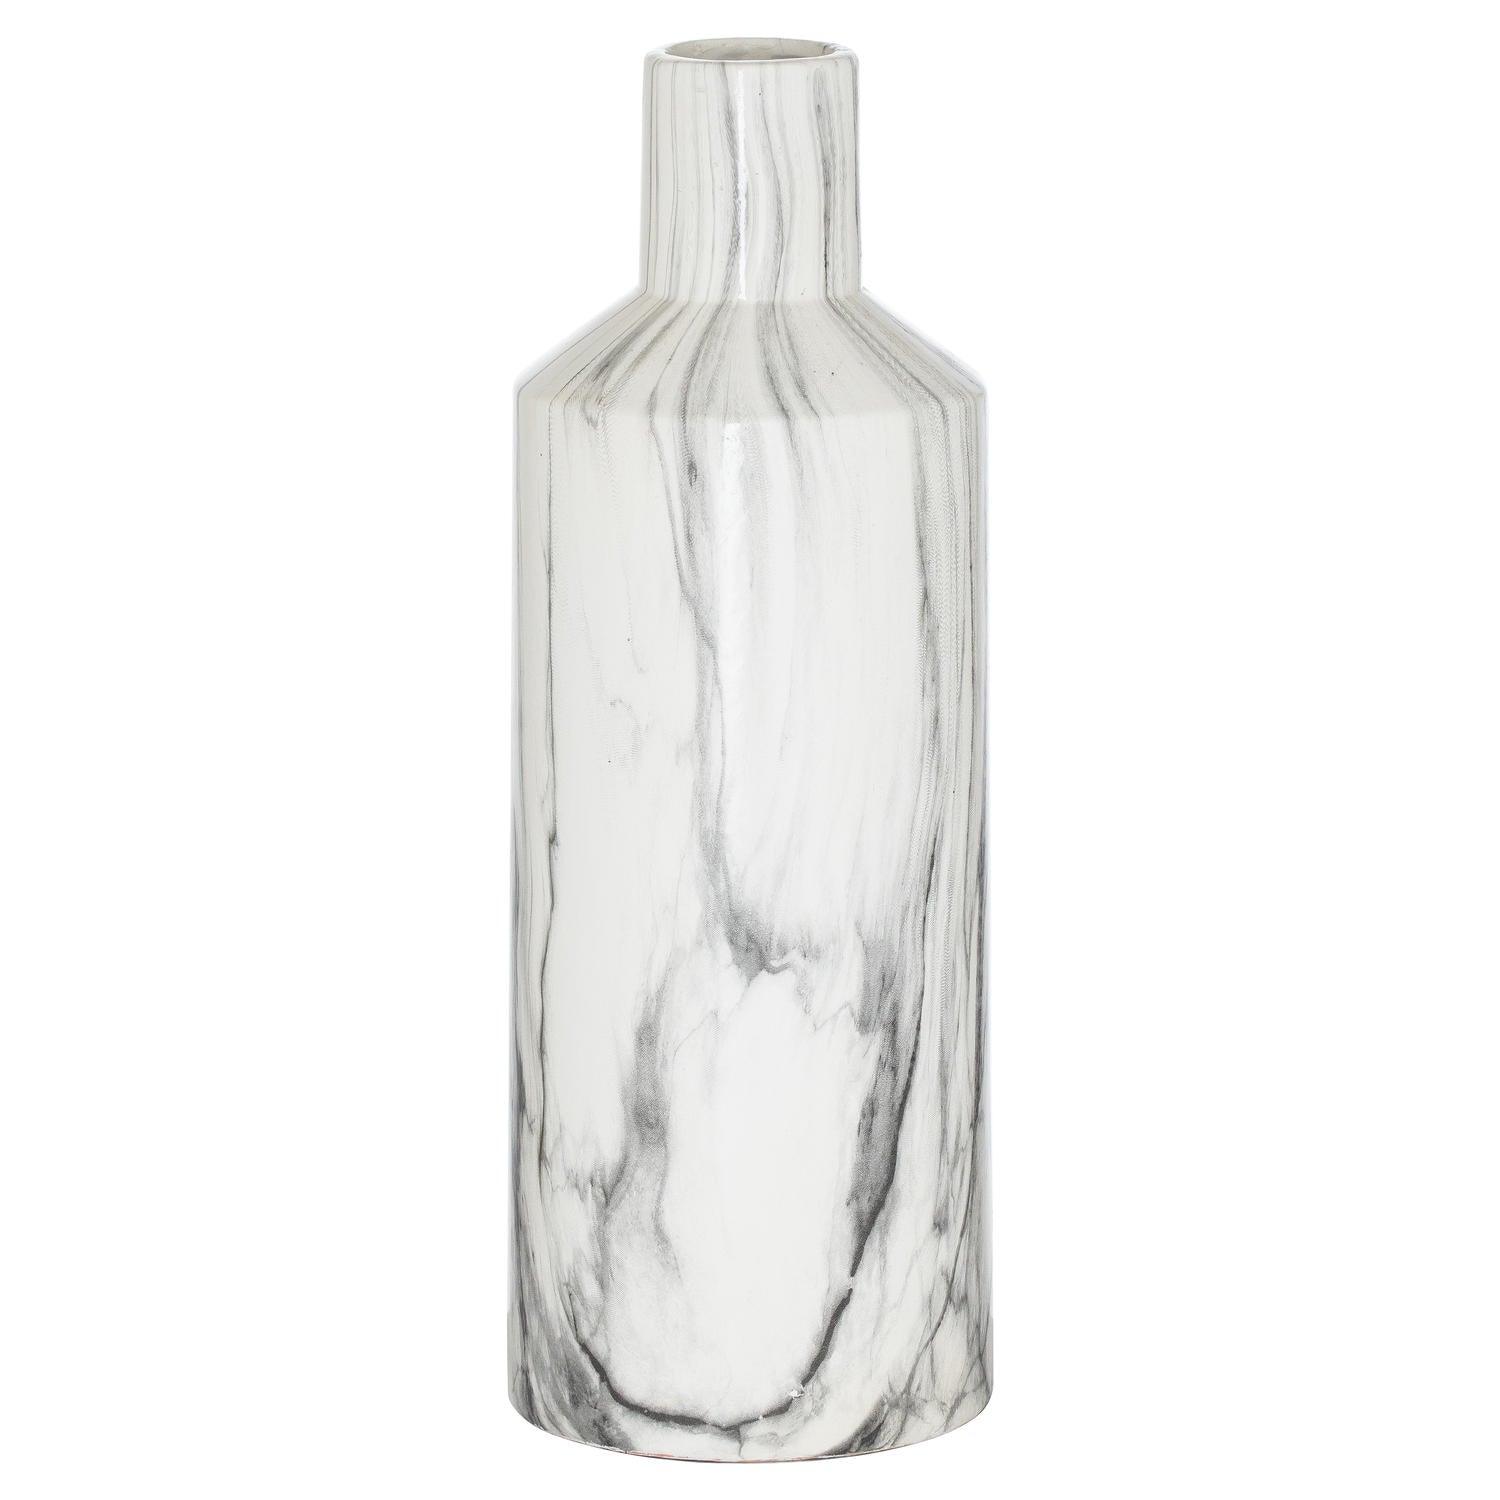 View Marble Sutra Vase information